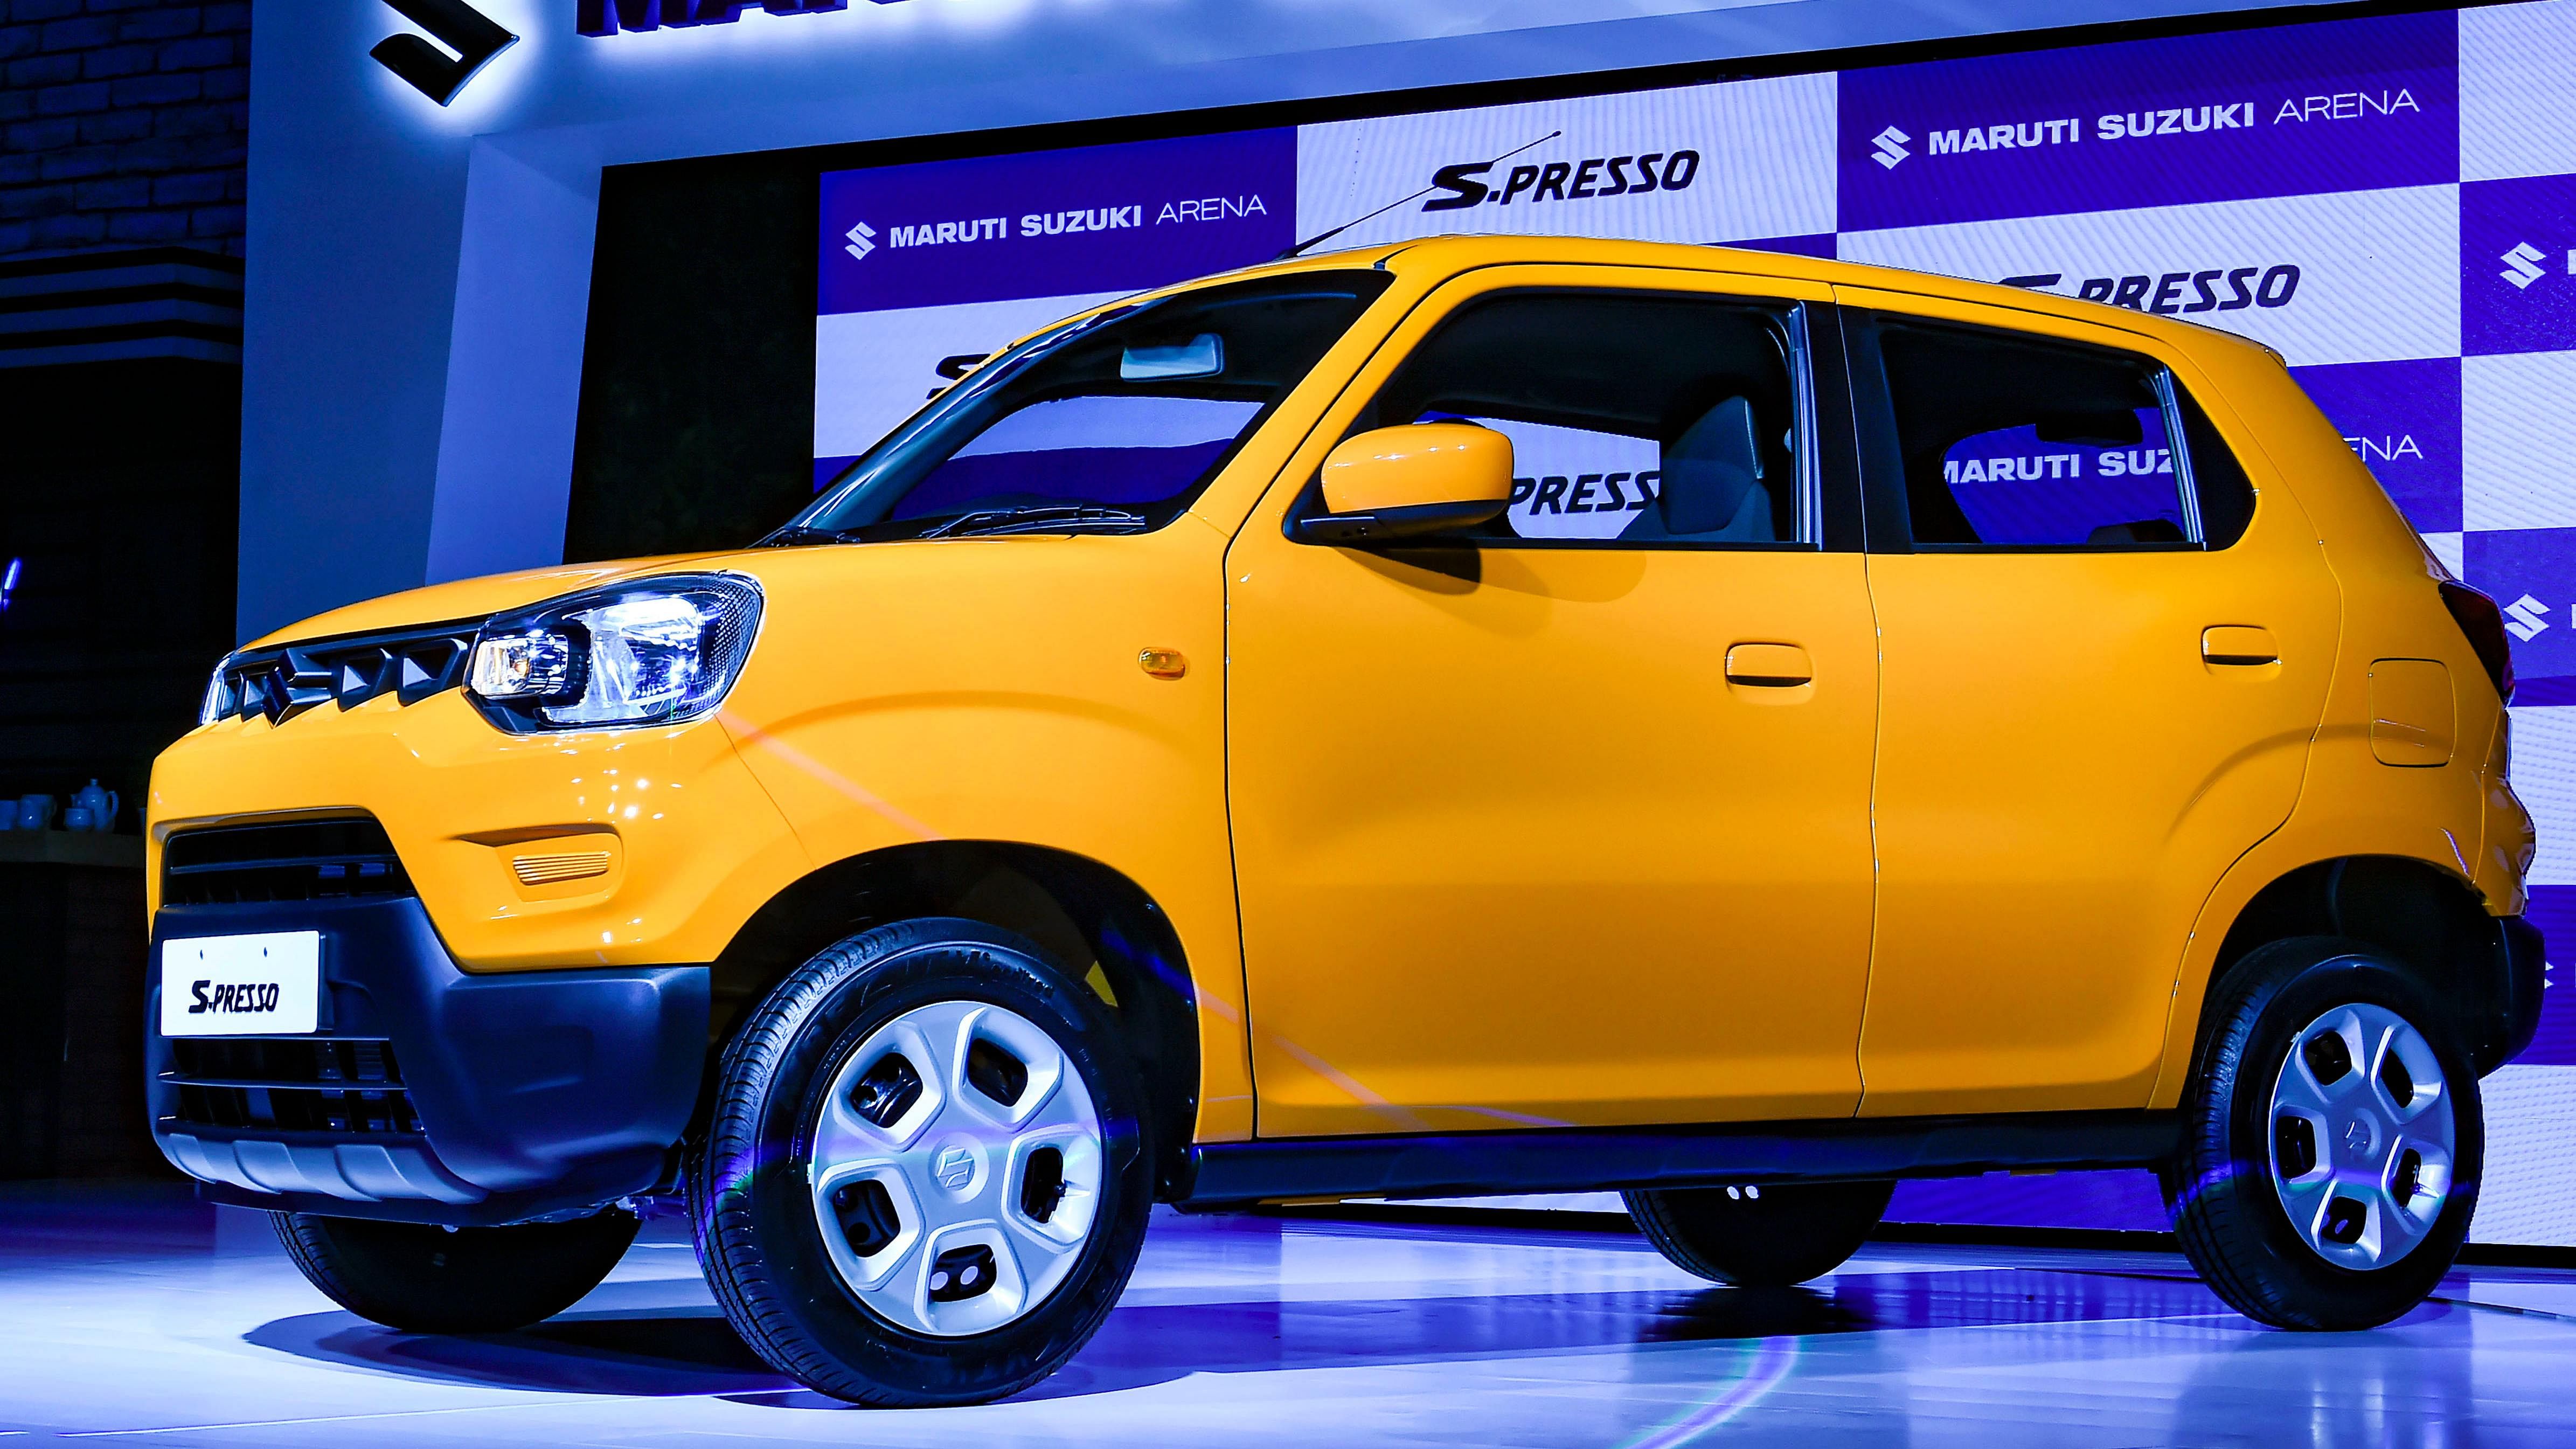 The new S-Presso comes with 1-litre petrol engine with idle-start-stop technology offering fuel efficiency of up to 25.3 km per litre. Credit: PTI Photo